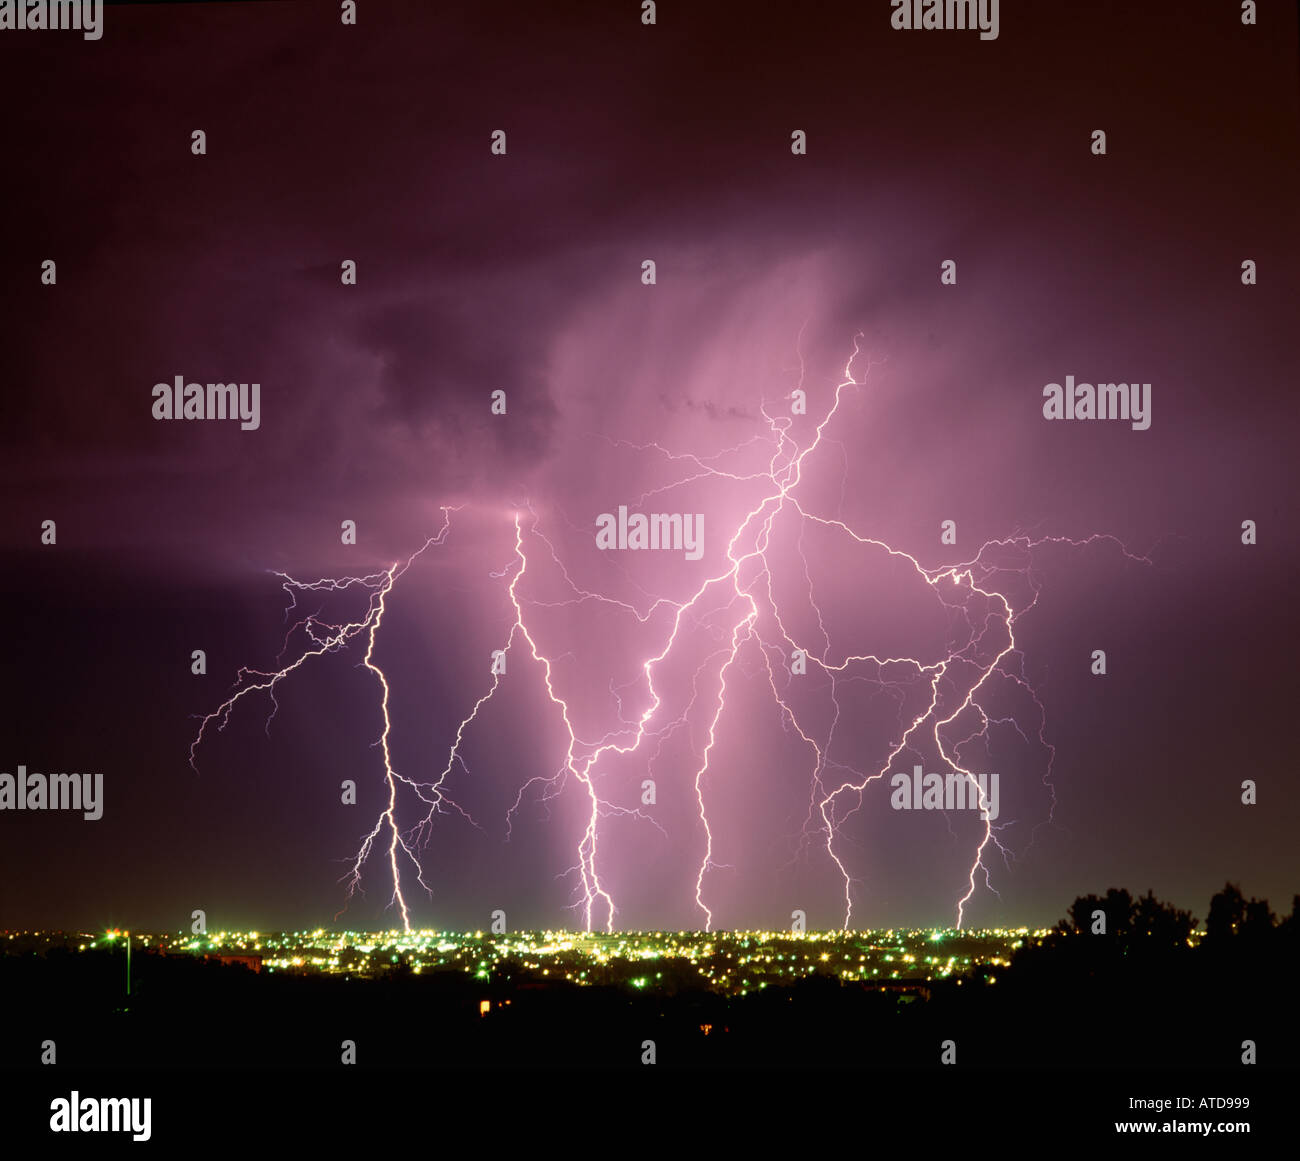 Dramatic display of lightning bolts shooting across a stormy night sky above the lights of a city Stock Photo